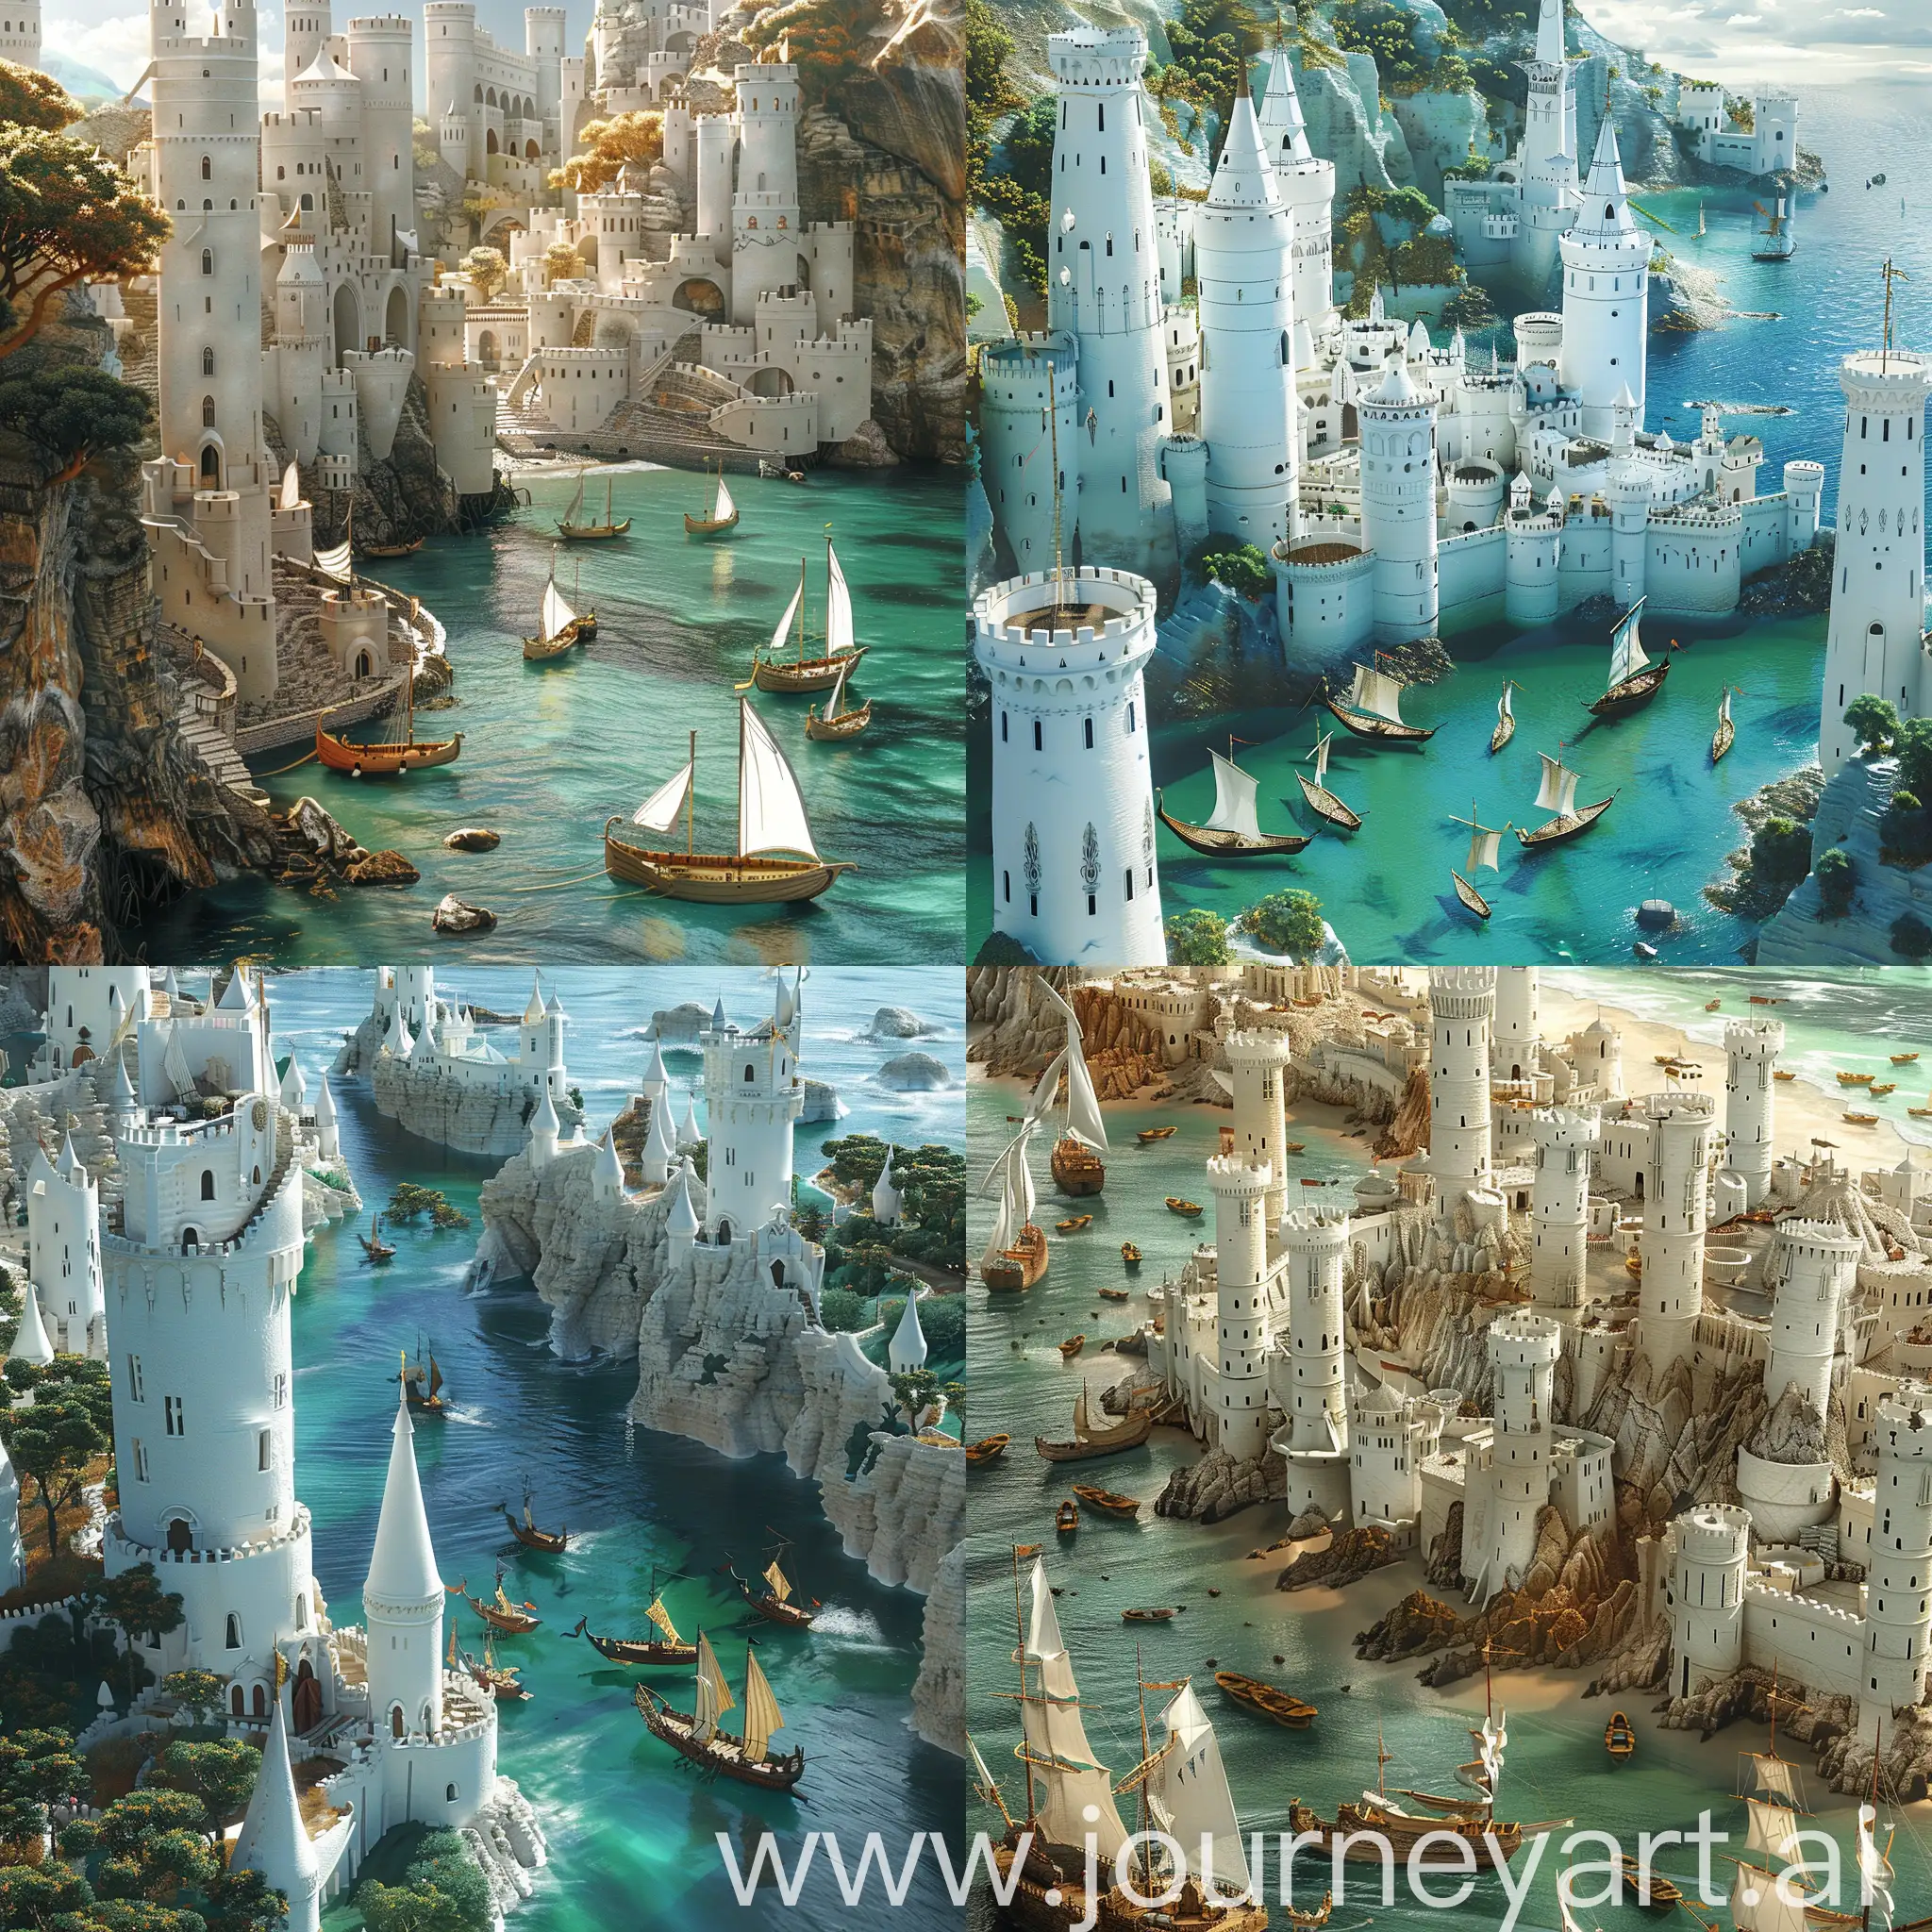 elven city with white towers, several ports and elven boats, fantasy style, located in a beutifull coast. Sunshine